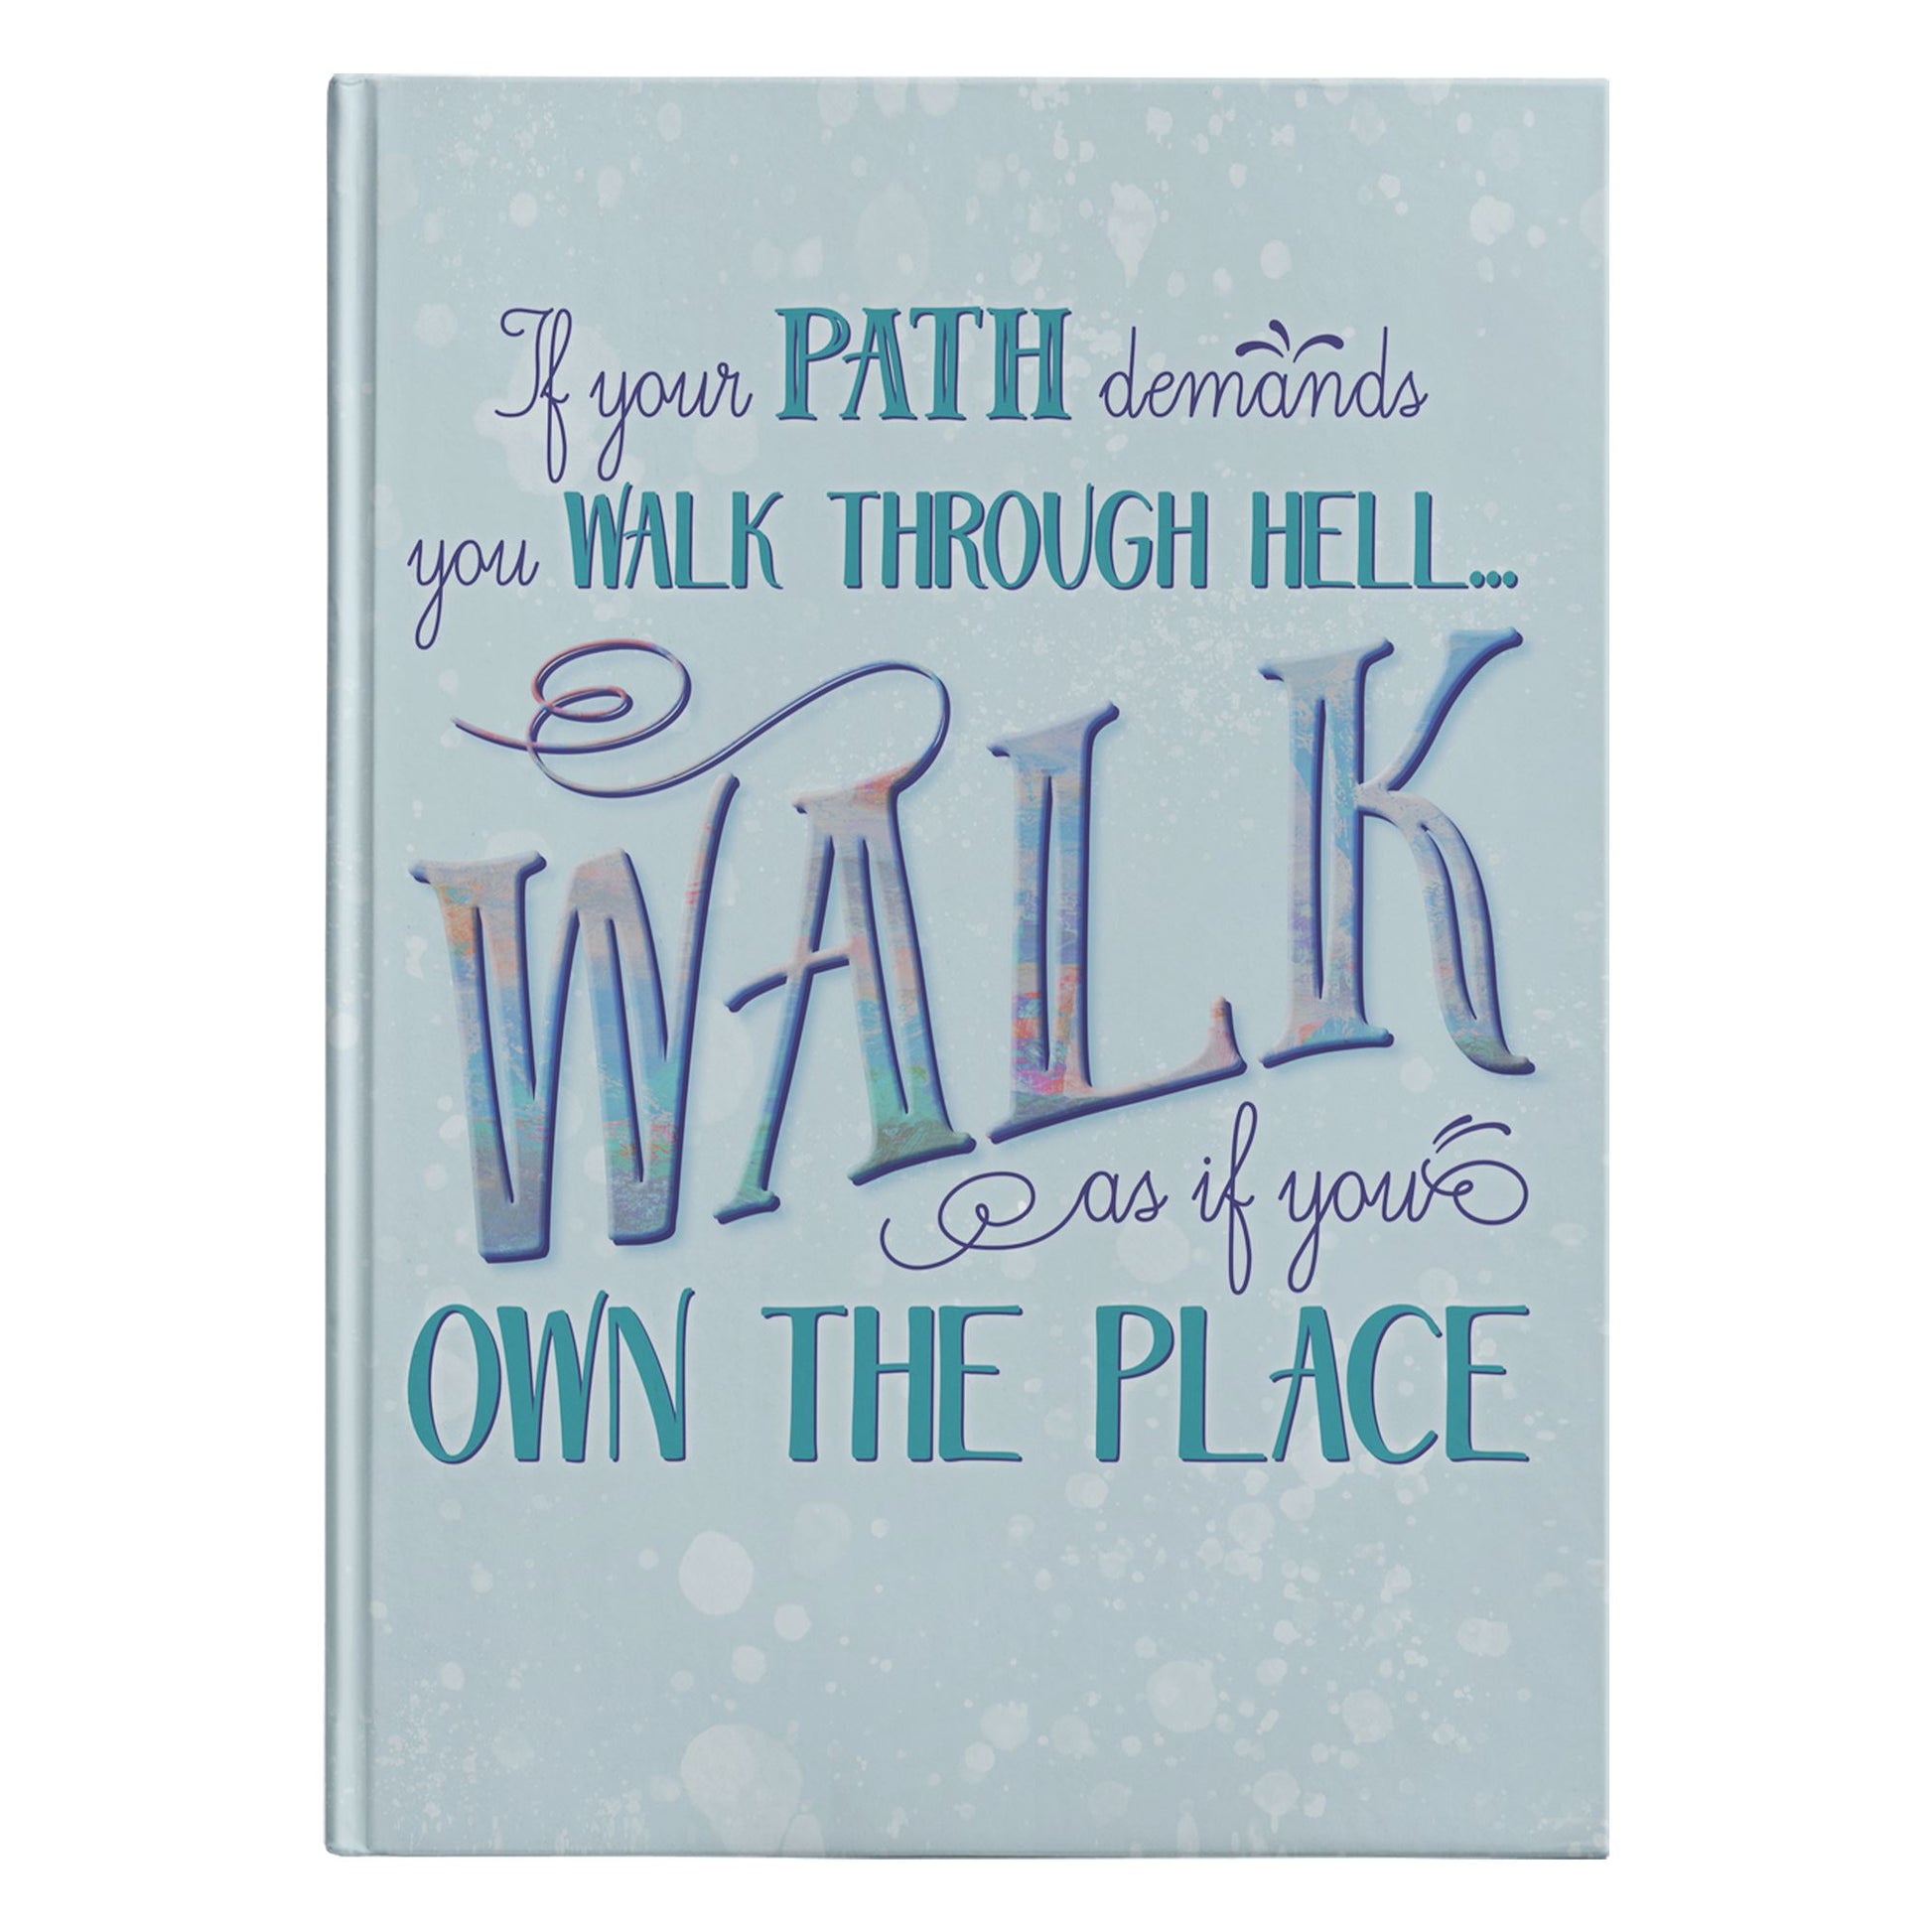 IF YOUR PATH DEMANDS YOU WALK THROUGH HELL WALK AS IF YOU OWN THE PLACE JOURNAL